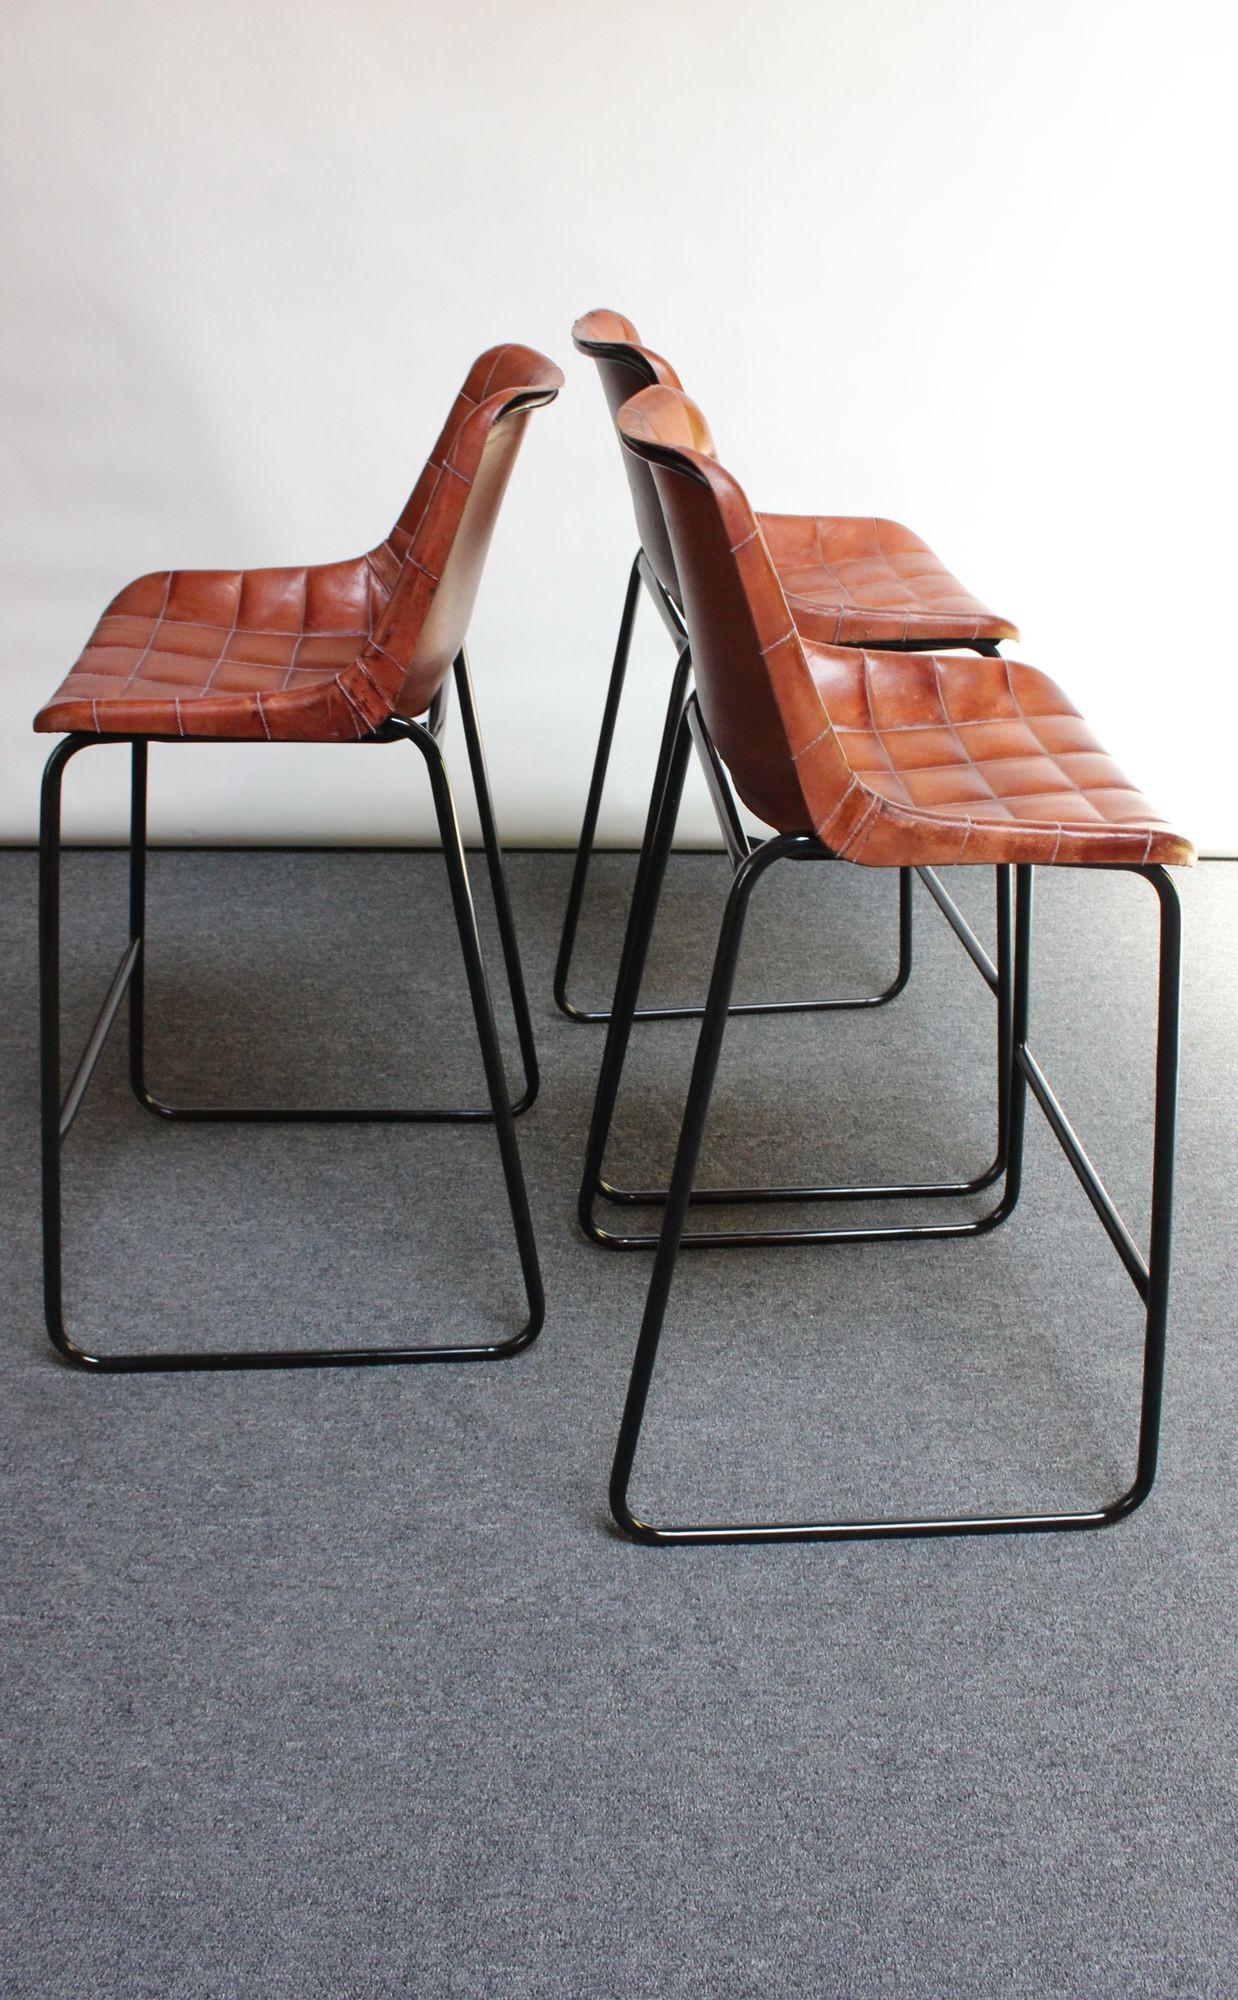 Set of Three Italian Vintage Leatherette and Wrought Iron Barstools For Sale 11